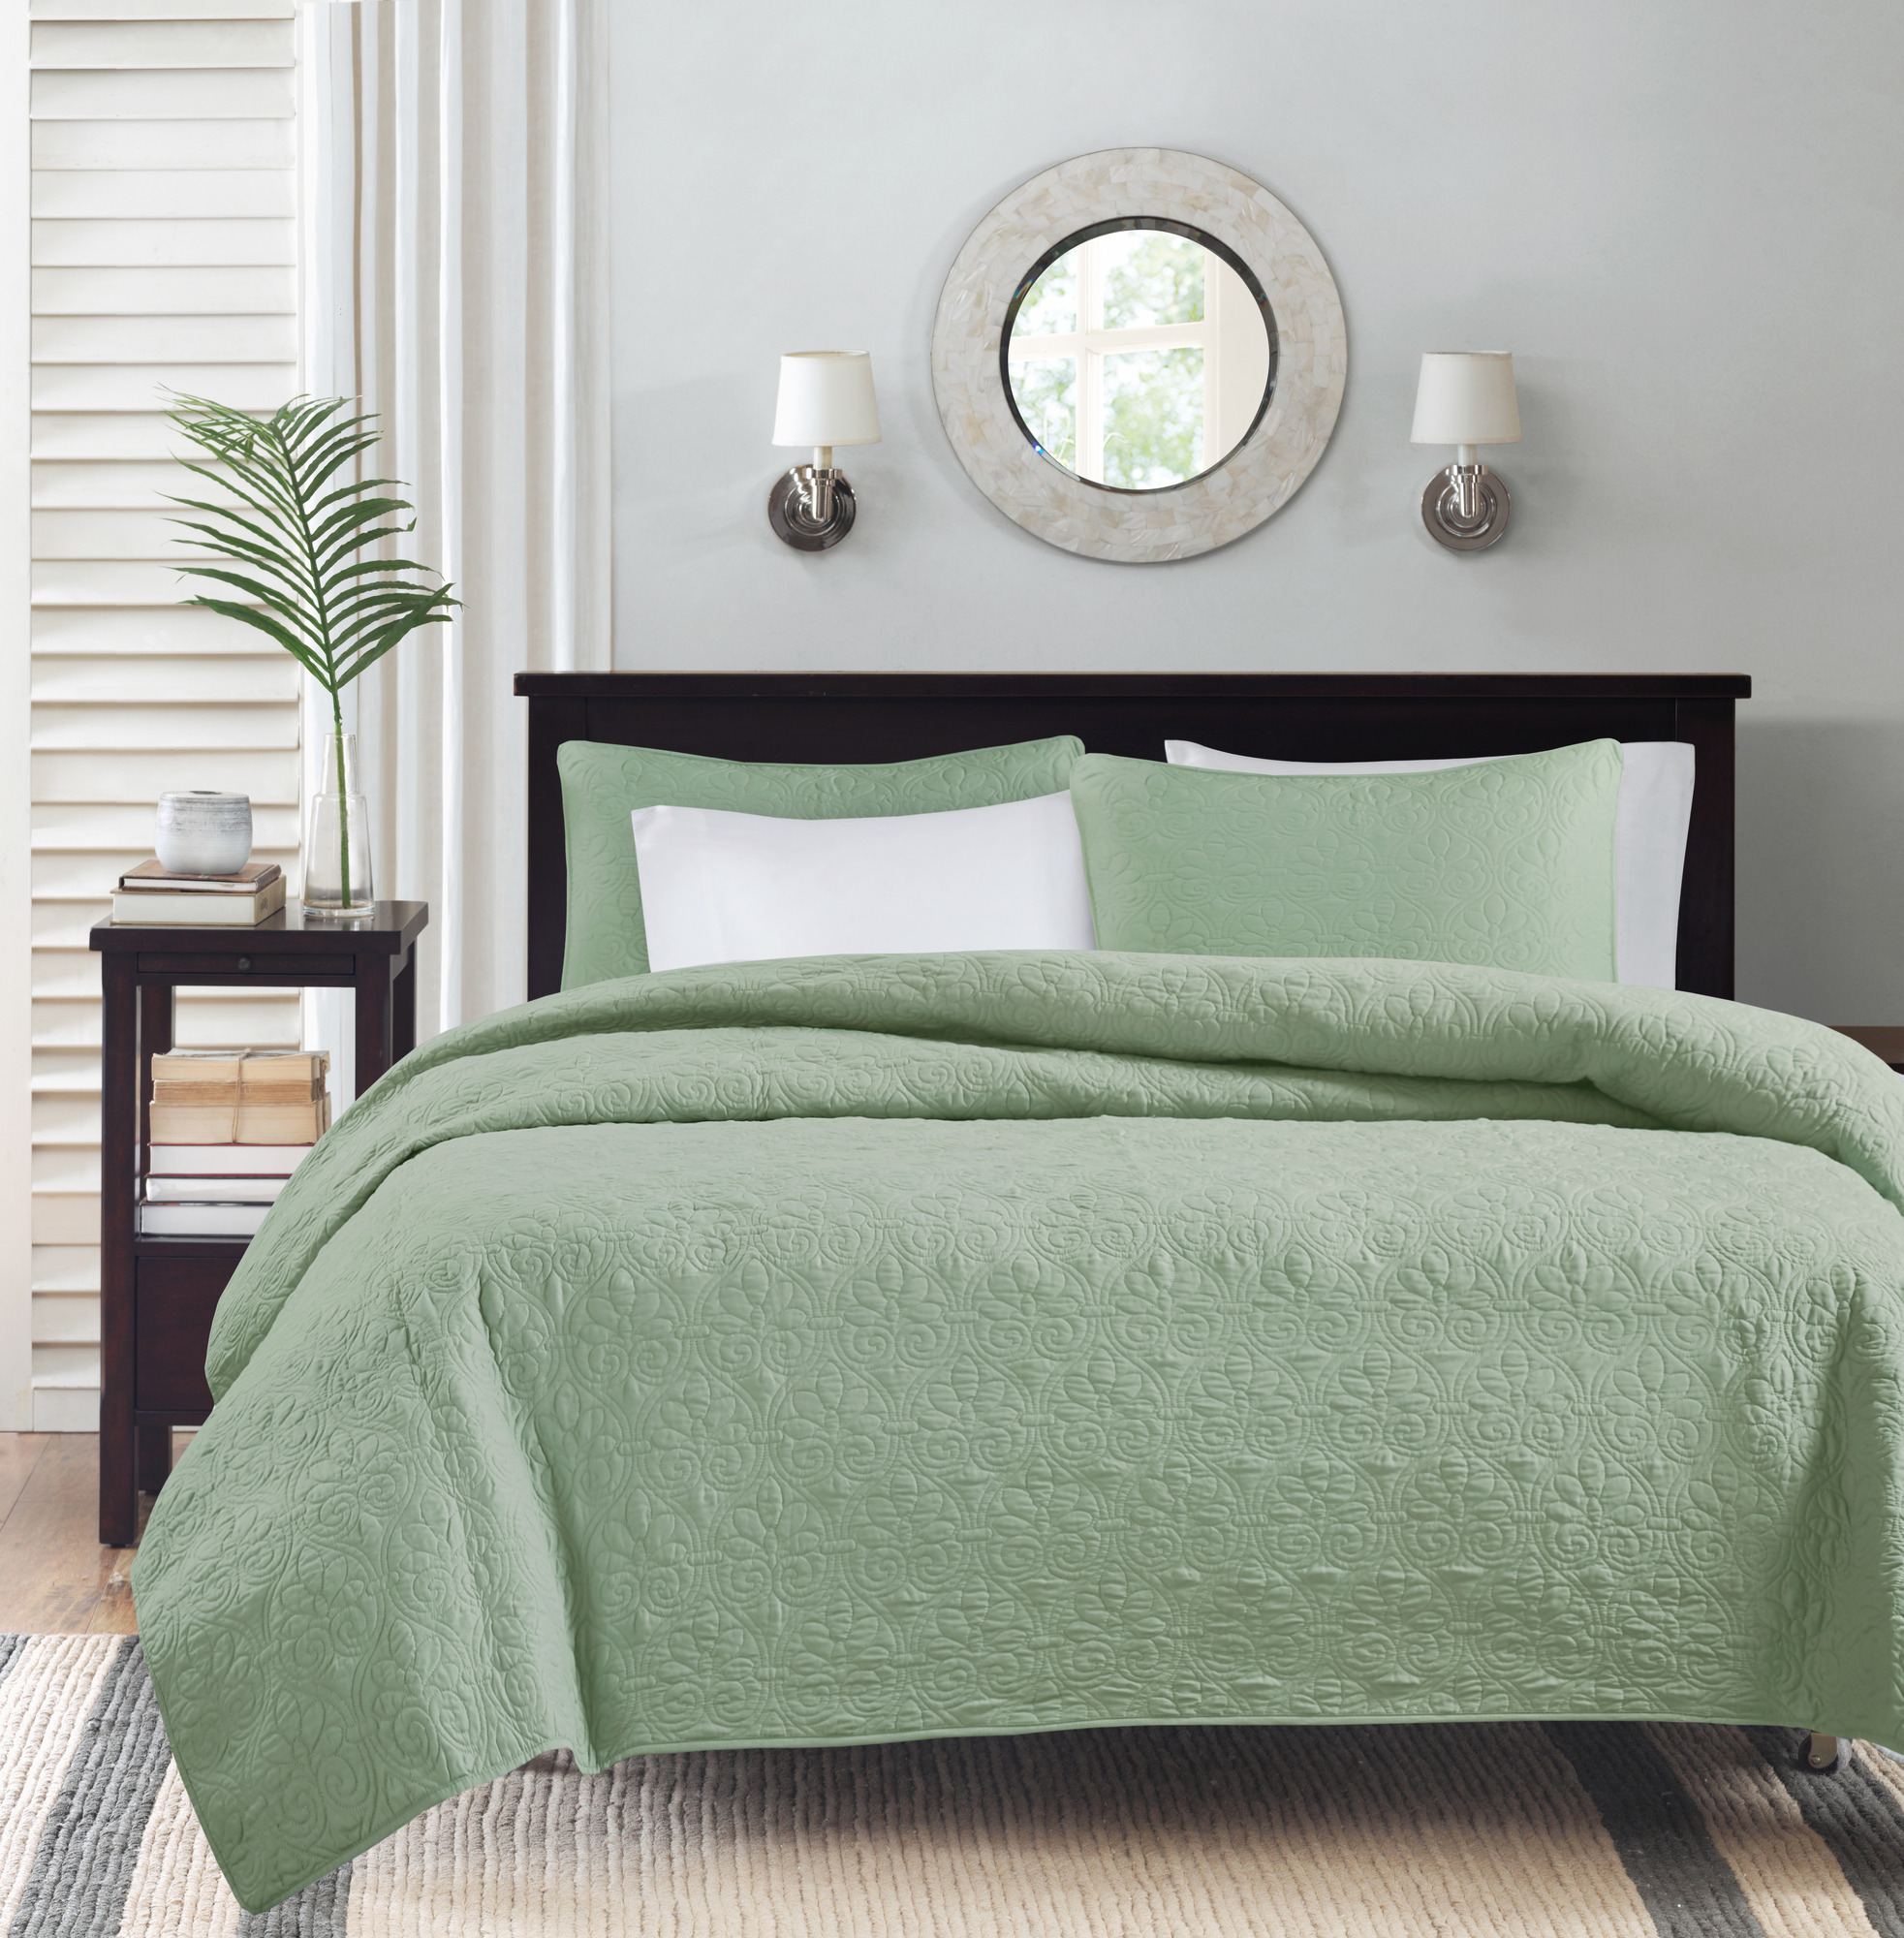 Home Essence Vancouver Super Soft Reversible Coverlet Set, Green, Full/Queen - image 3 of 12